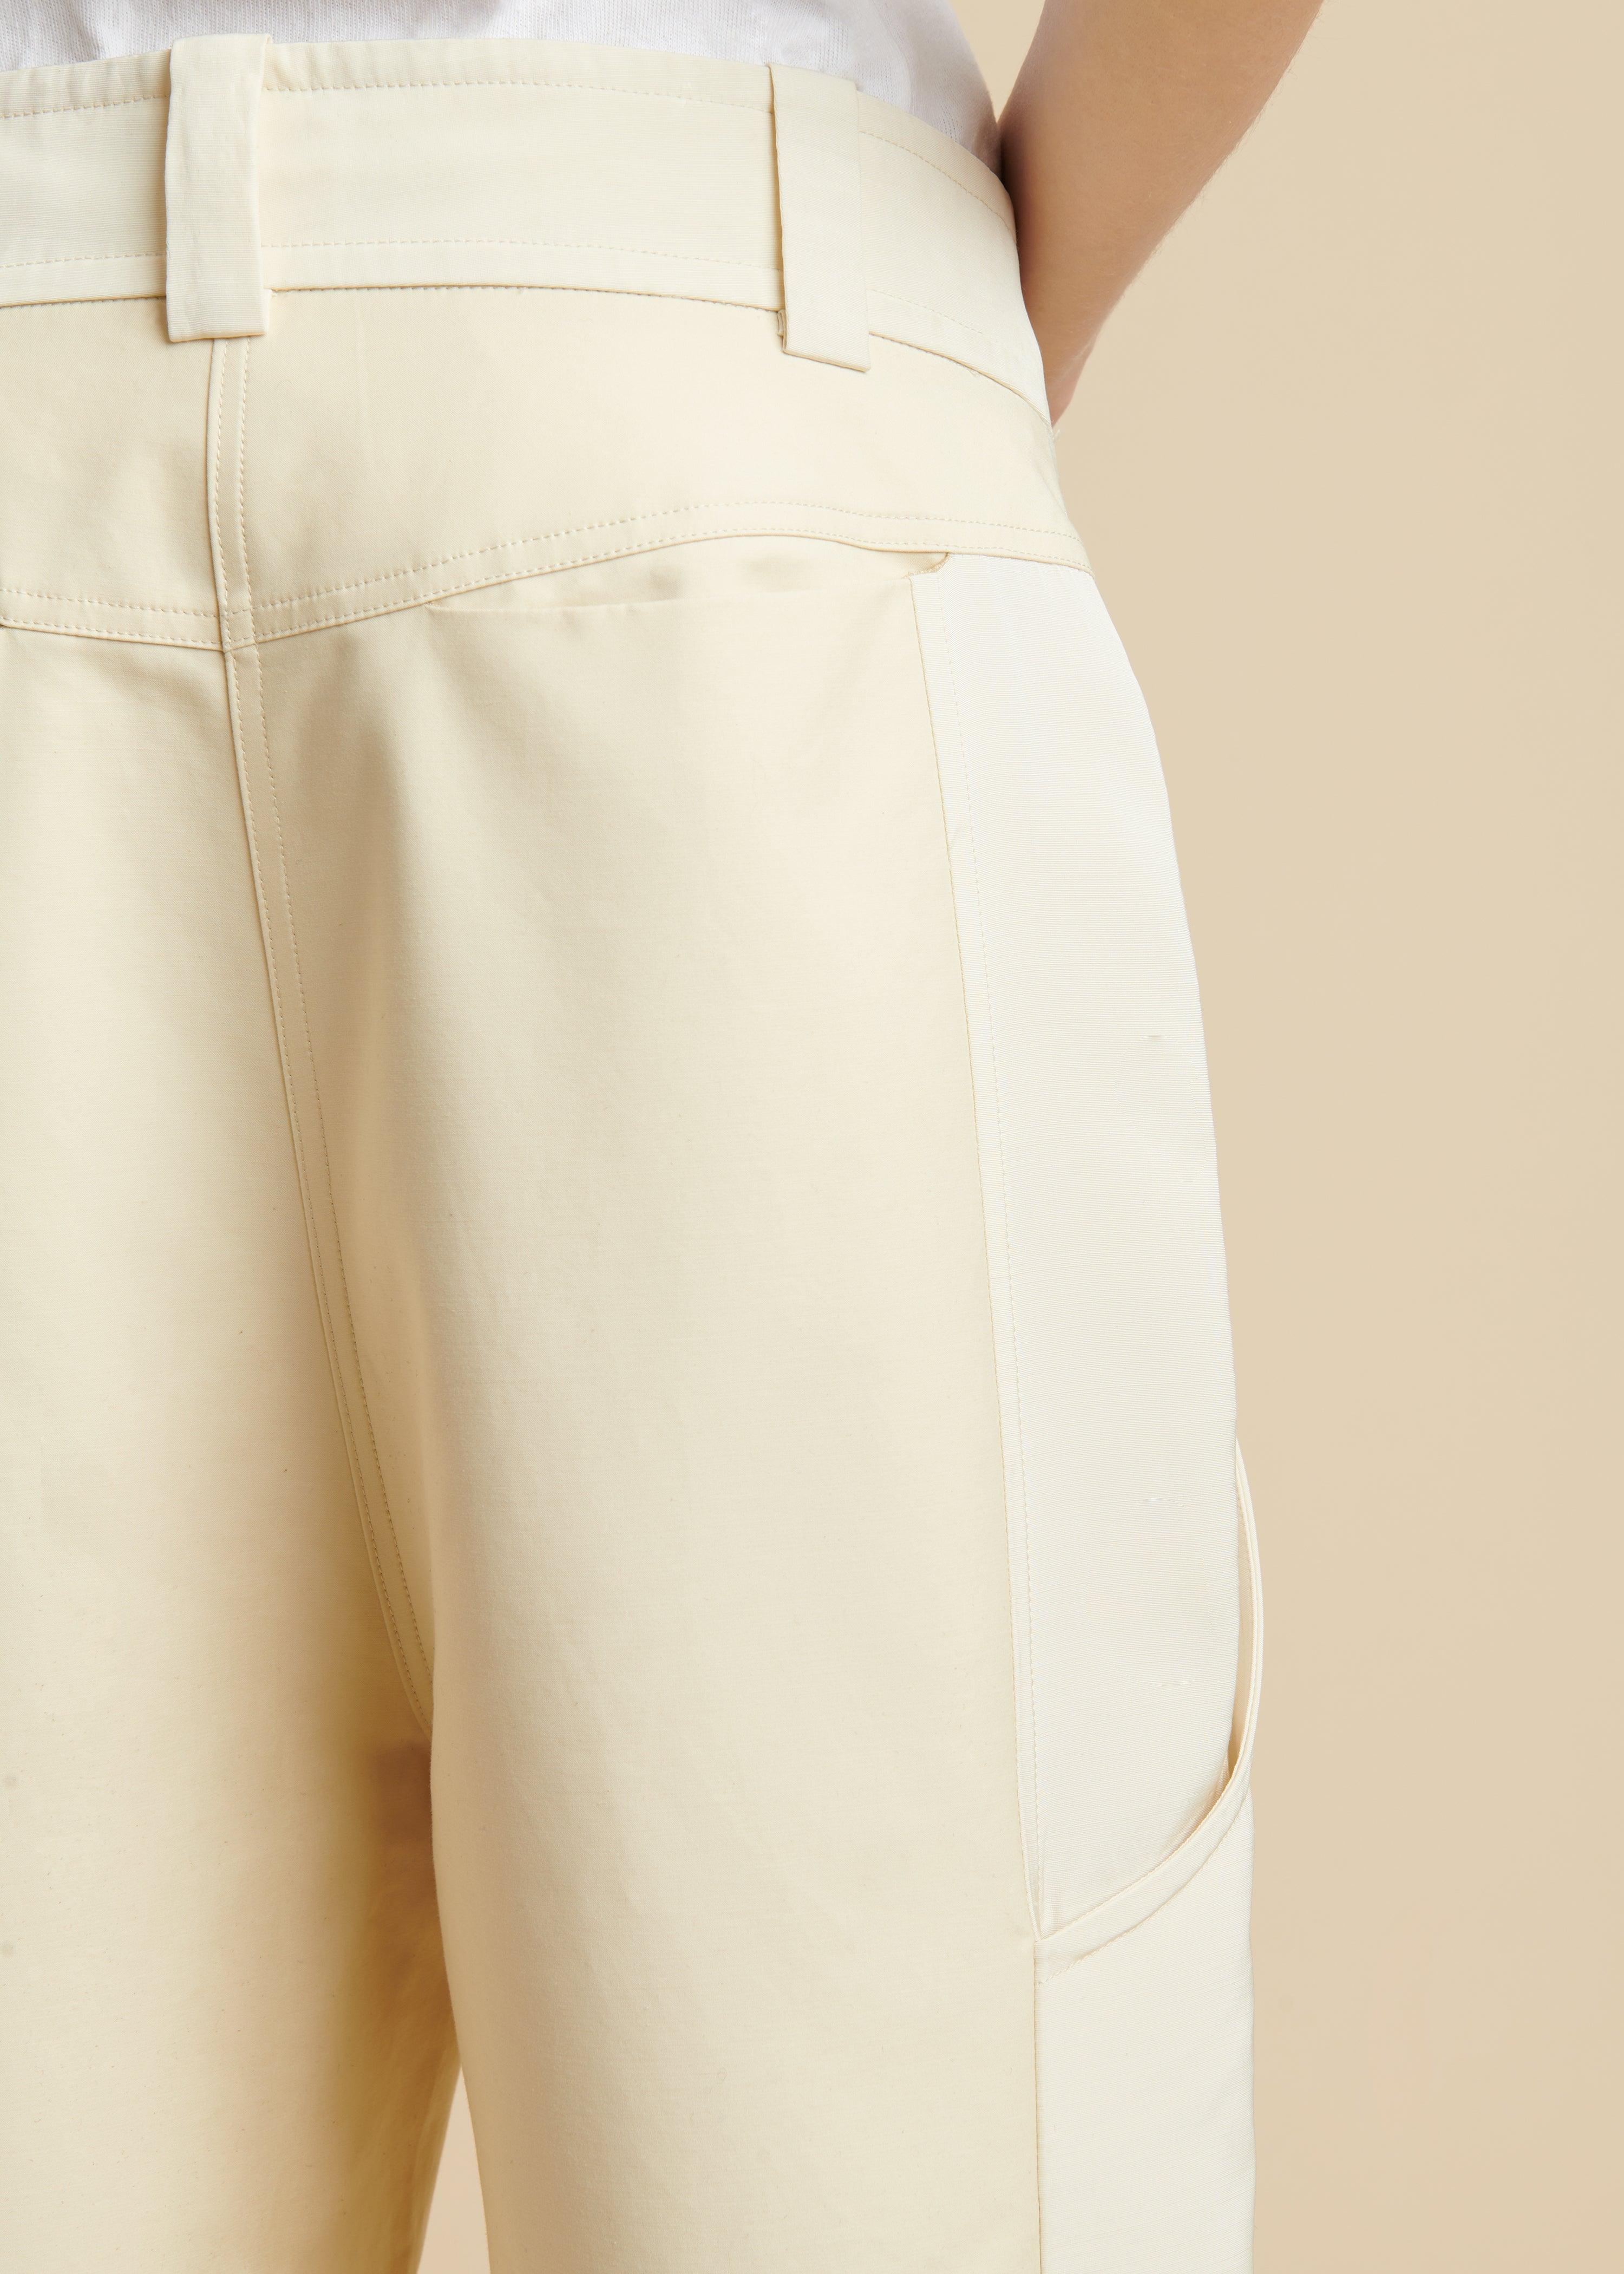 The Leon Pant in Bone - The Iconic Issue